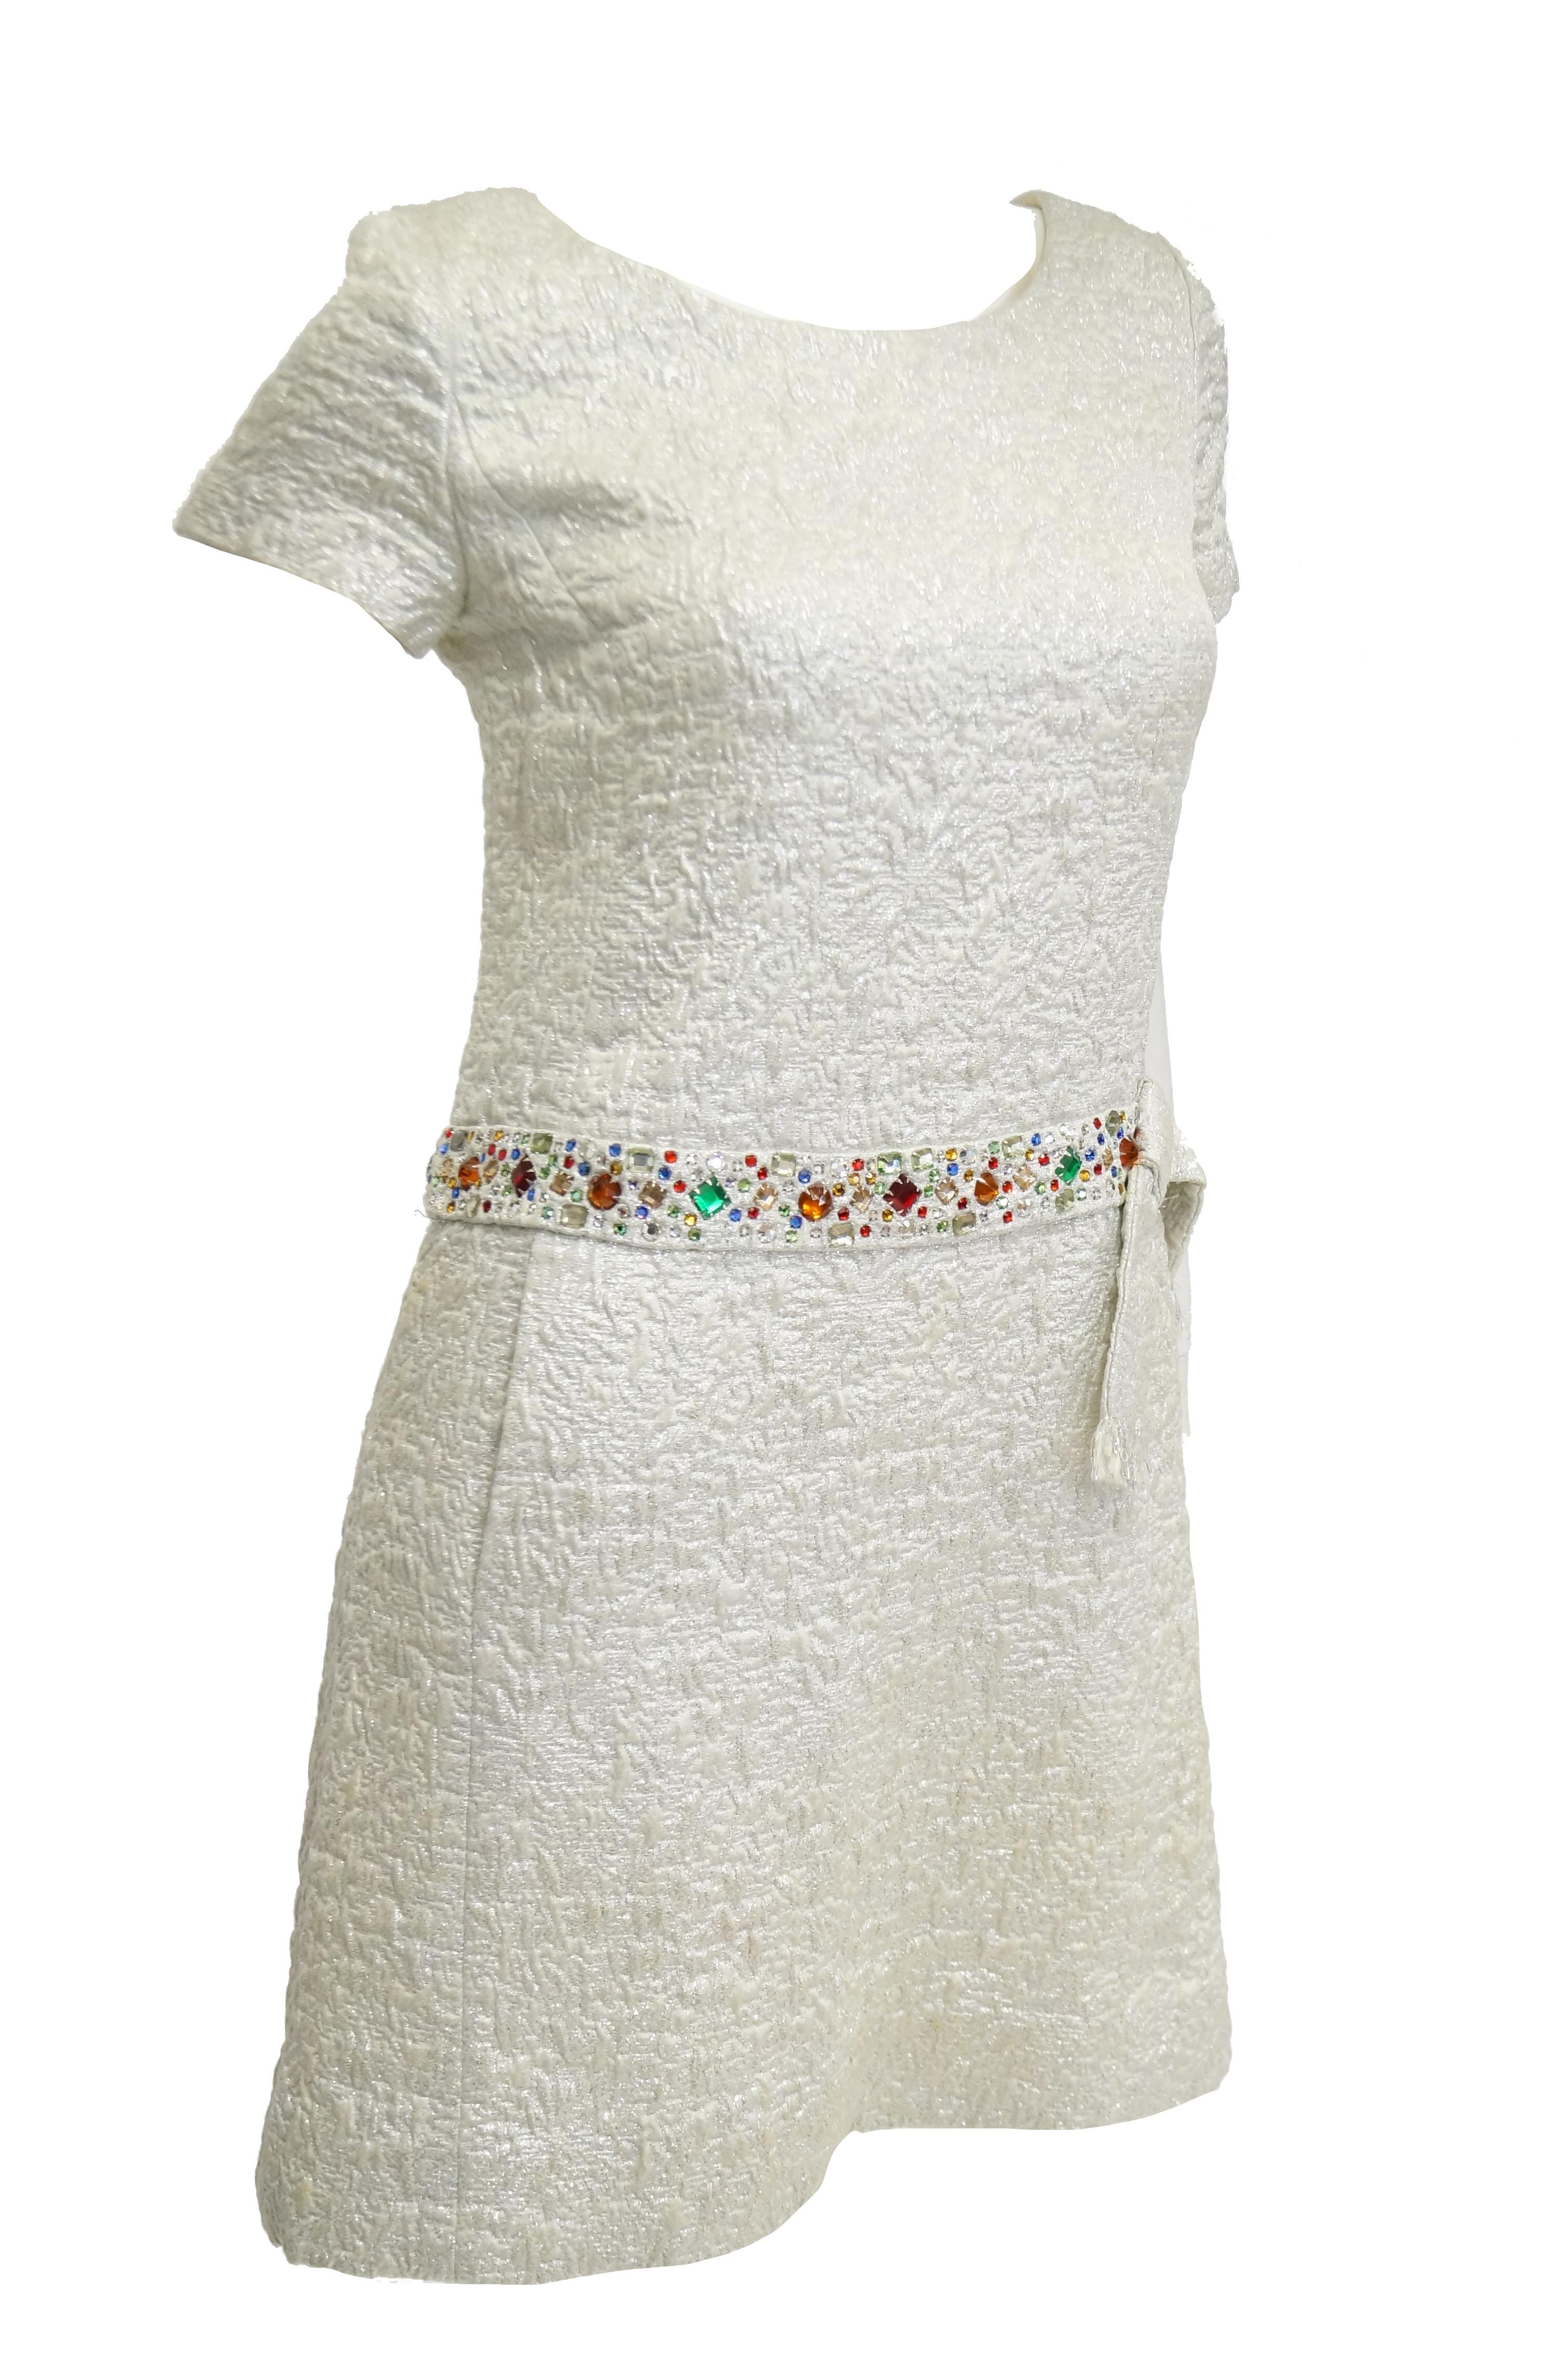 1960s B. Altman Silver Shift Cocktail Dress with Multicolor Rhinestone Belt In Excellent Condition For Sale In Houston, TX